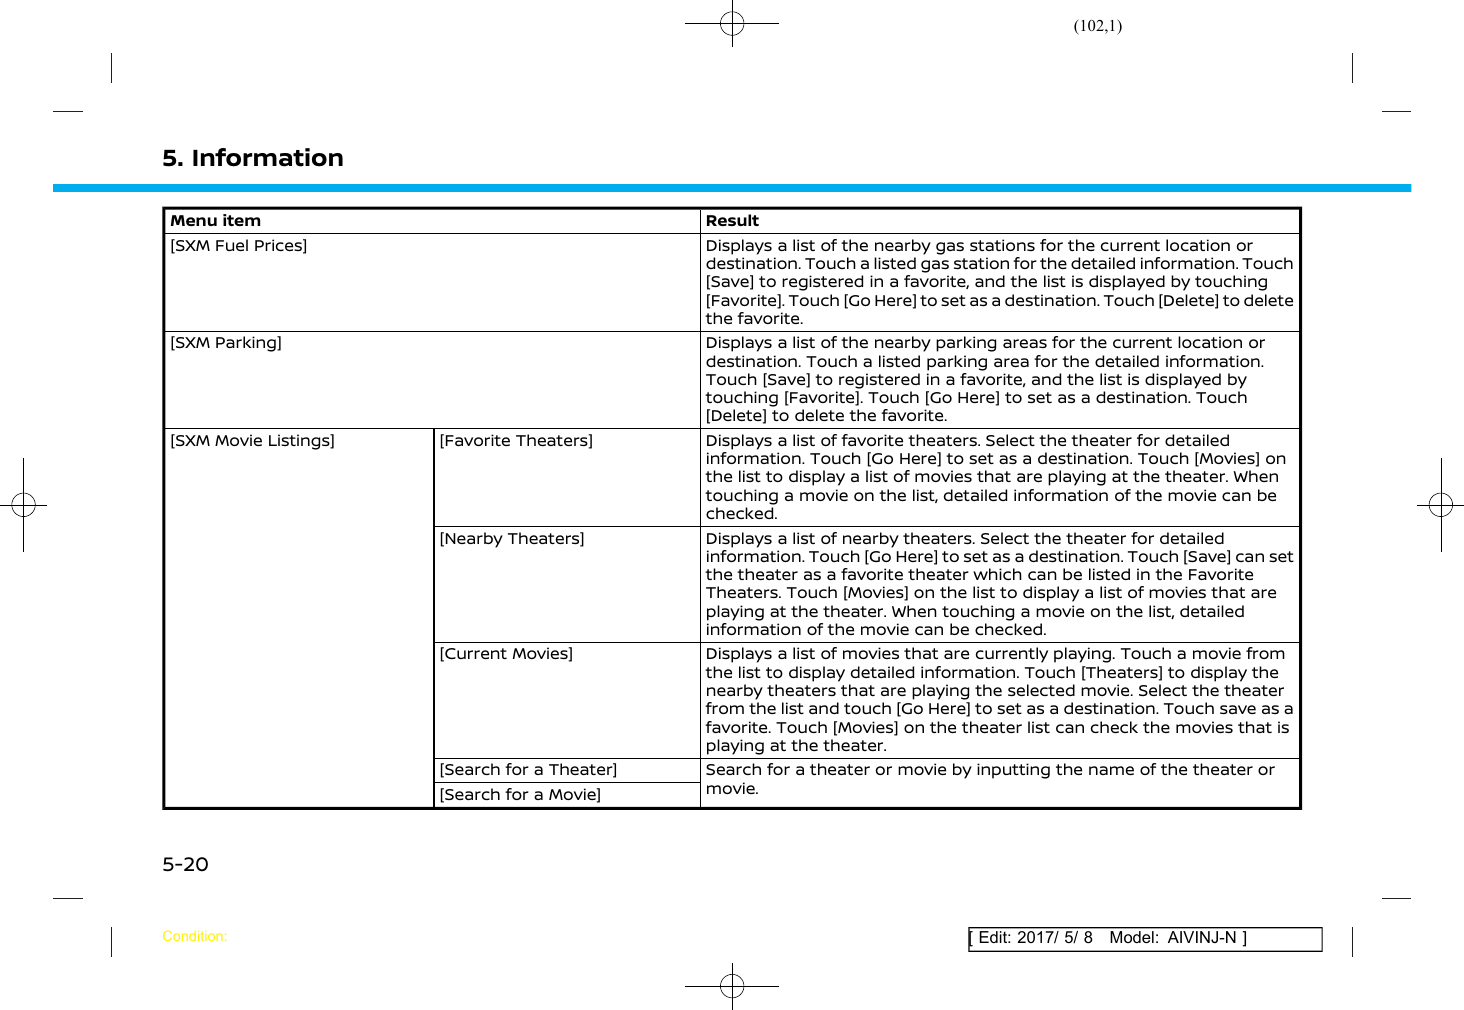 Page 102 of Robert Bosch Car Multimedia AIVICMFB0 Navigation System with Bluetooth and WLAN User Manual